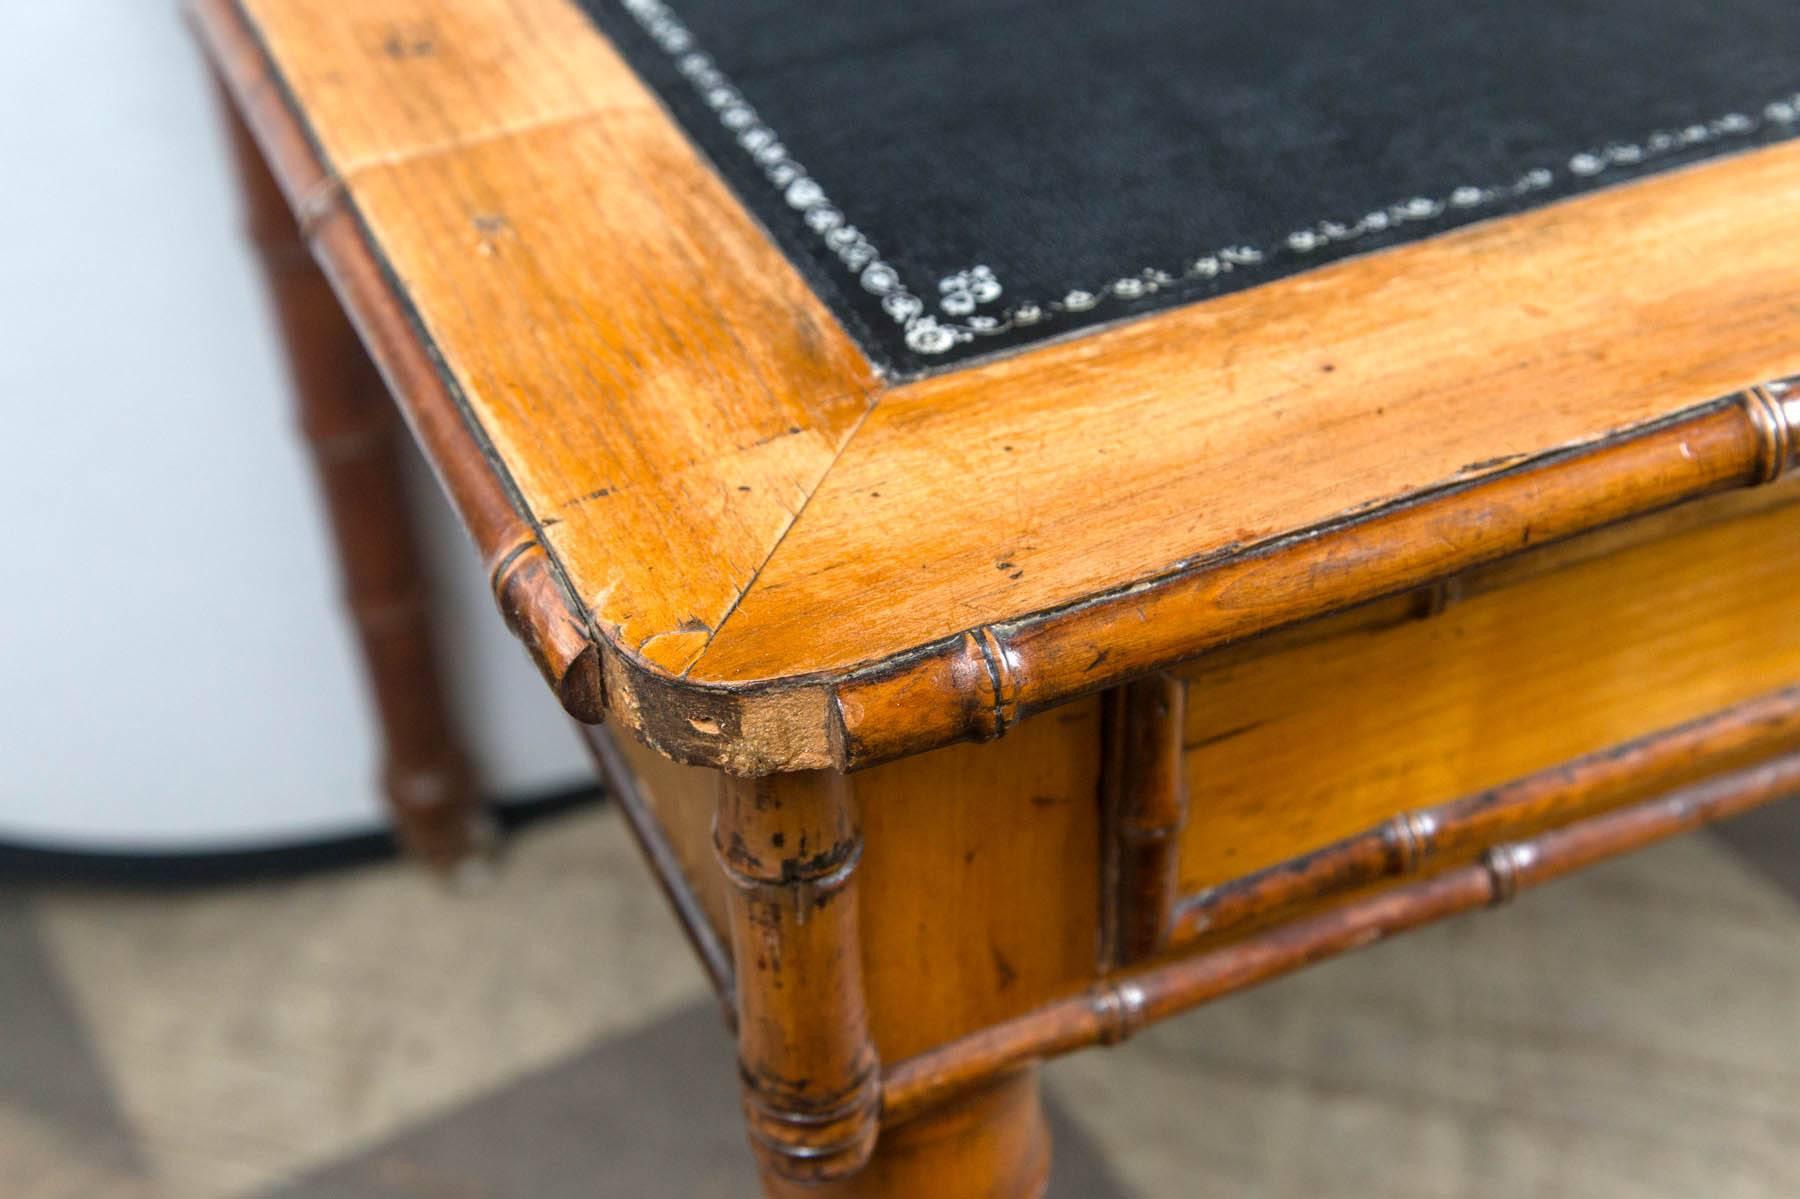 Dating from the Edwardian period, this faux bamboo writing table has two drawers and a silver tooled leather top.
The legs and the edging are faux bamboo turned. There porcelain casters appear to be original. The height from floor to under the